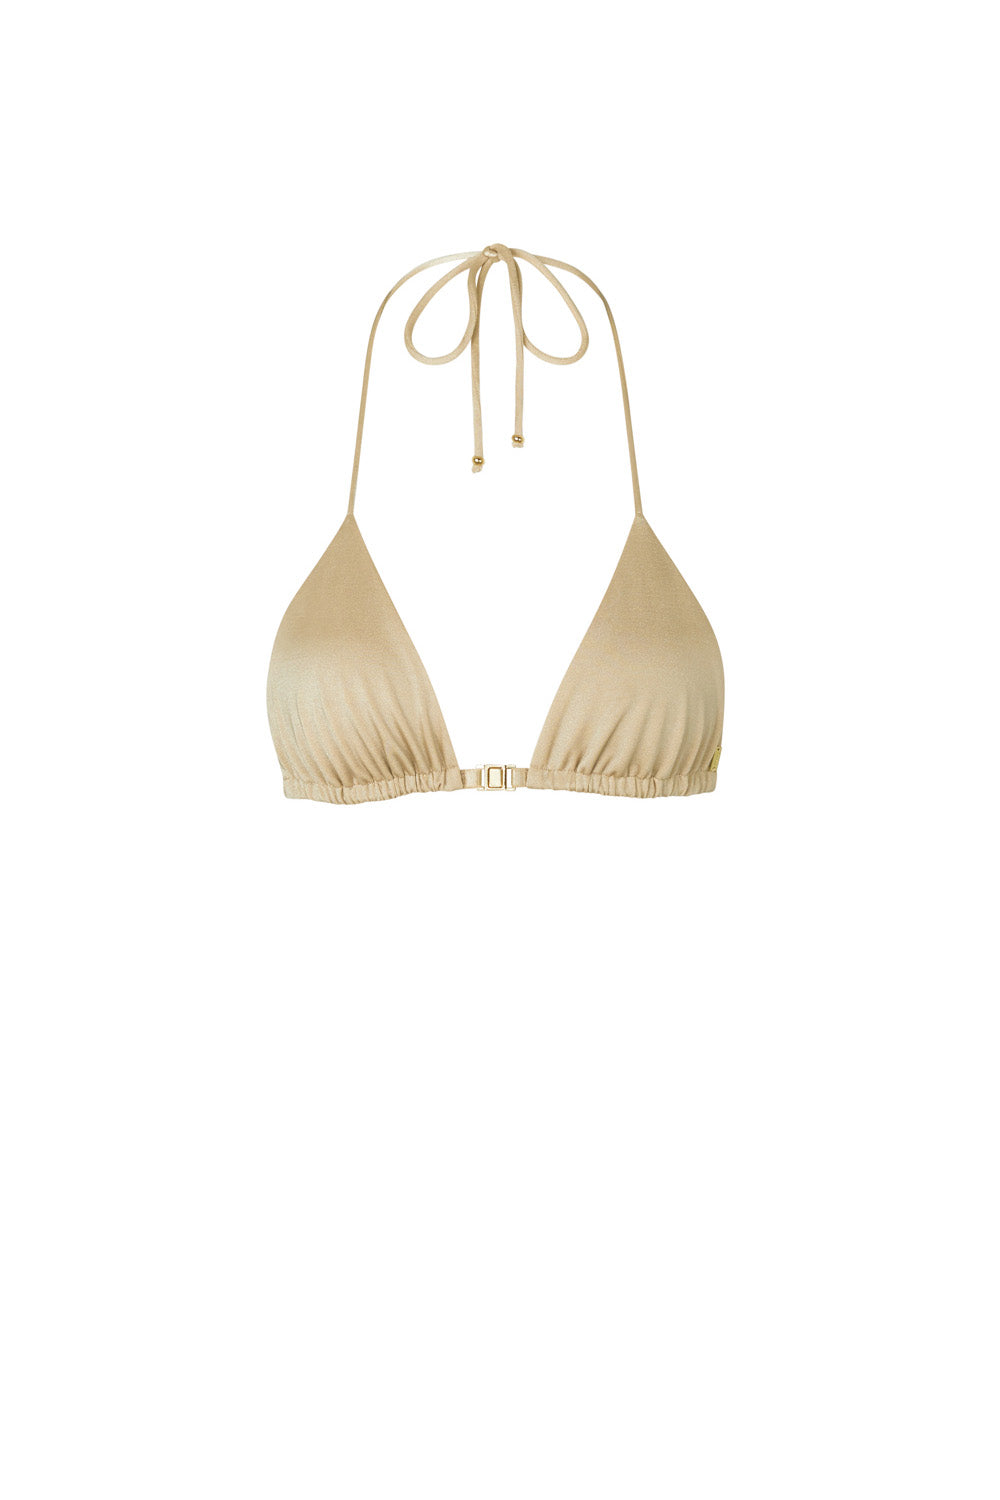 flook the label amari bralette top swimwear gold product image front